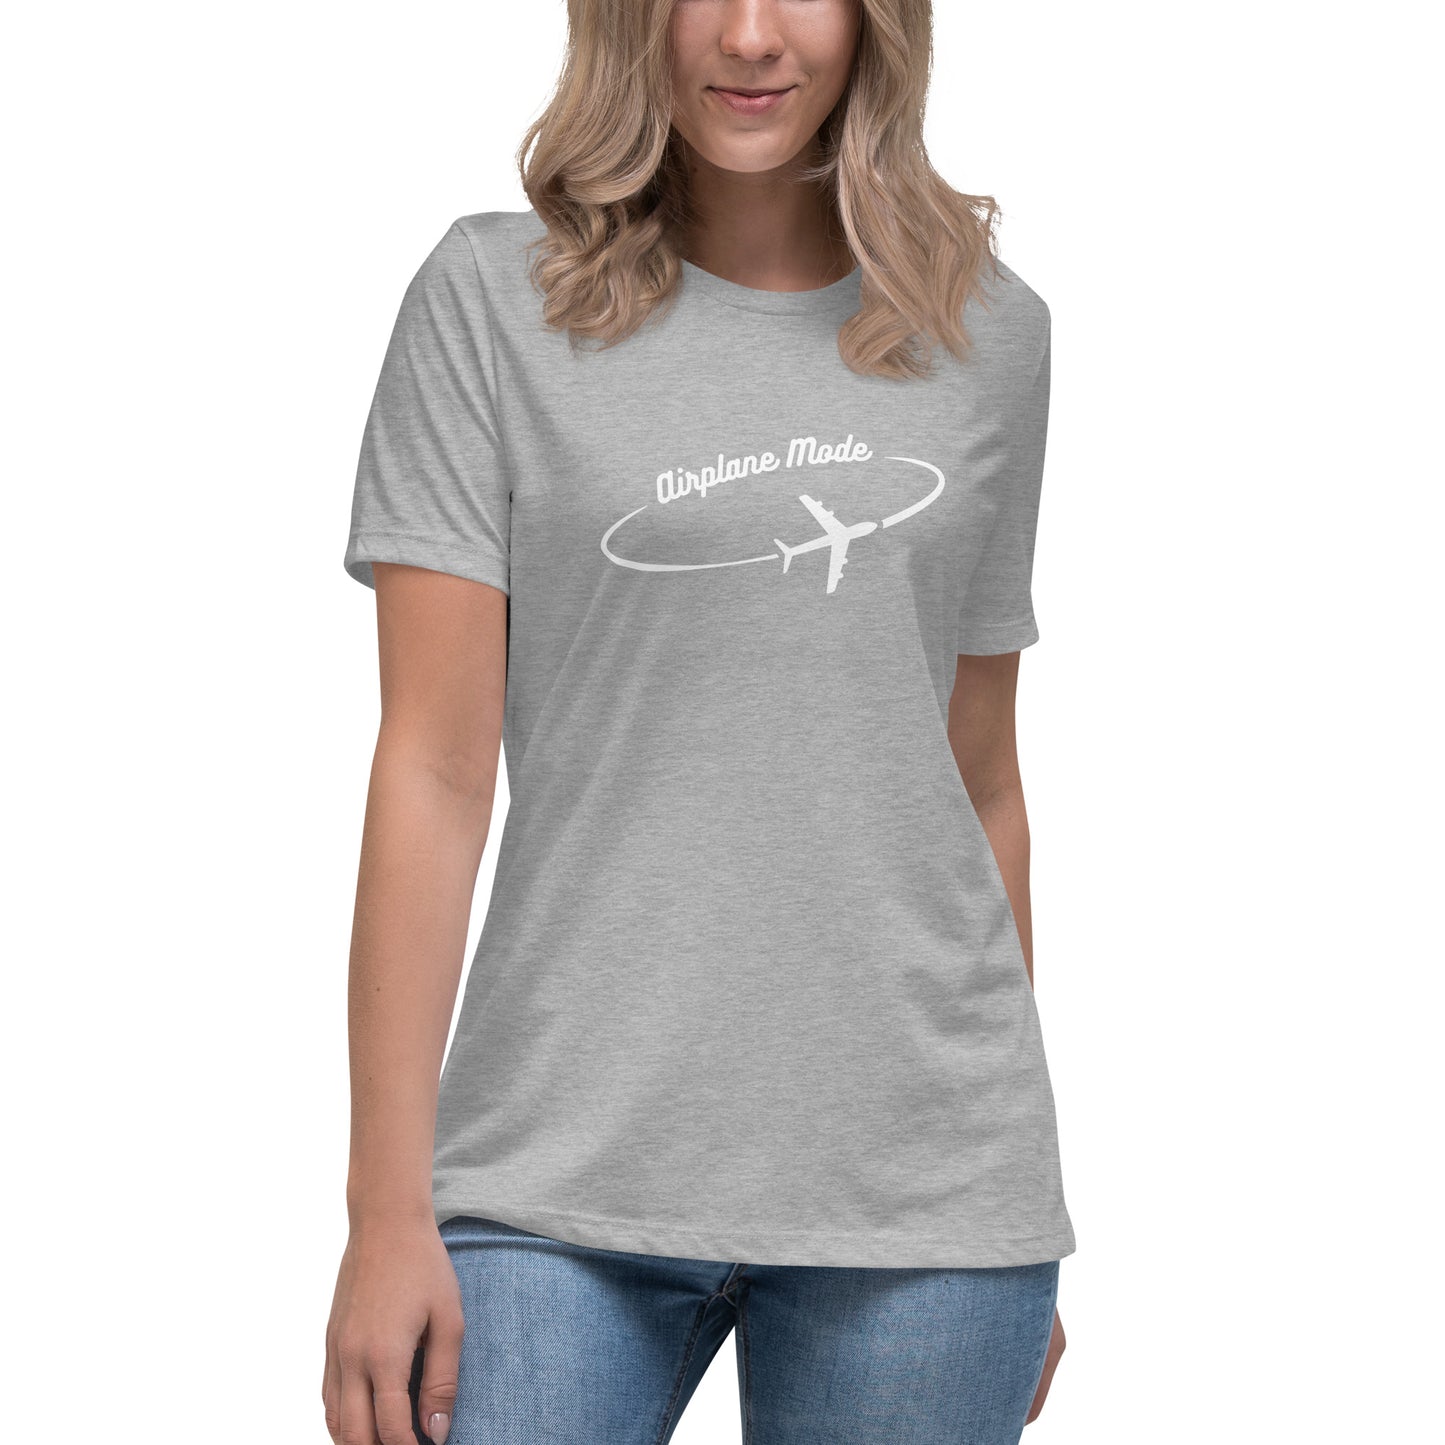 Airplane Mode - Women's Relaxed T-Shirt - White Letters